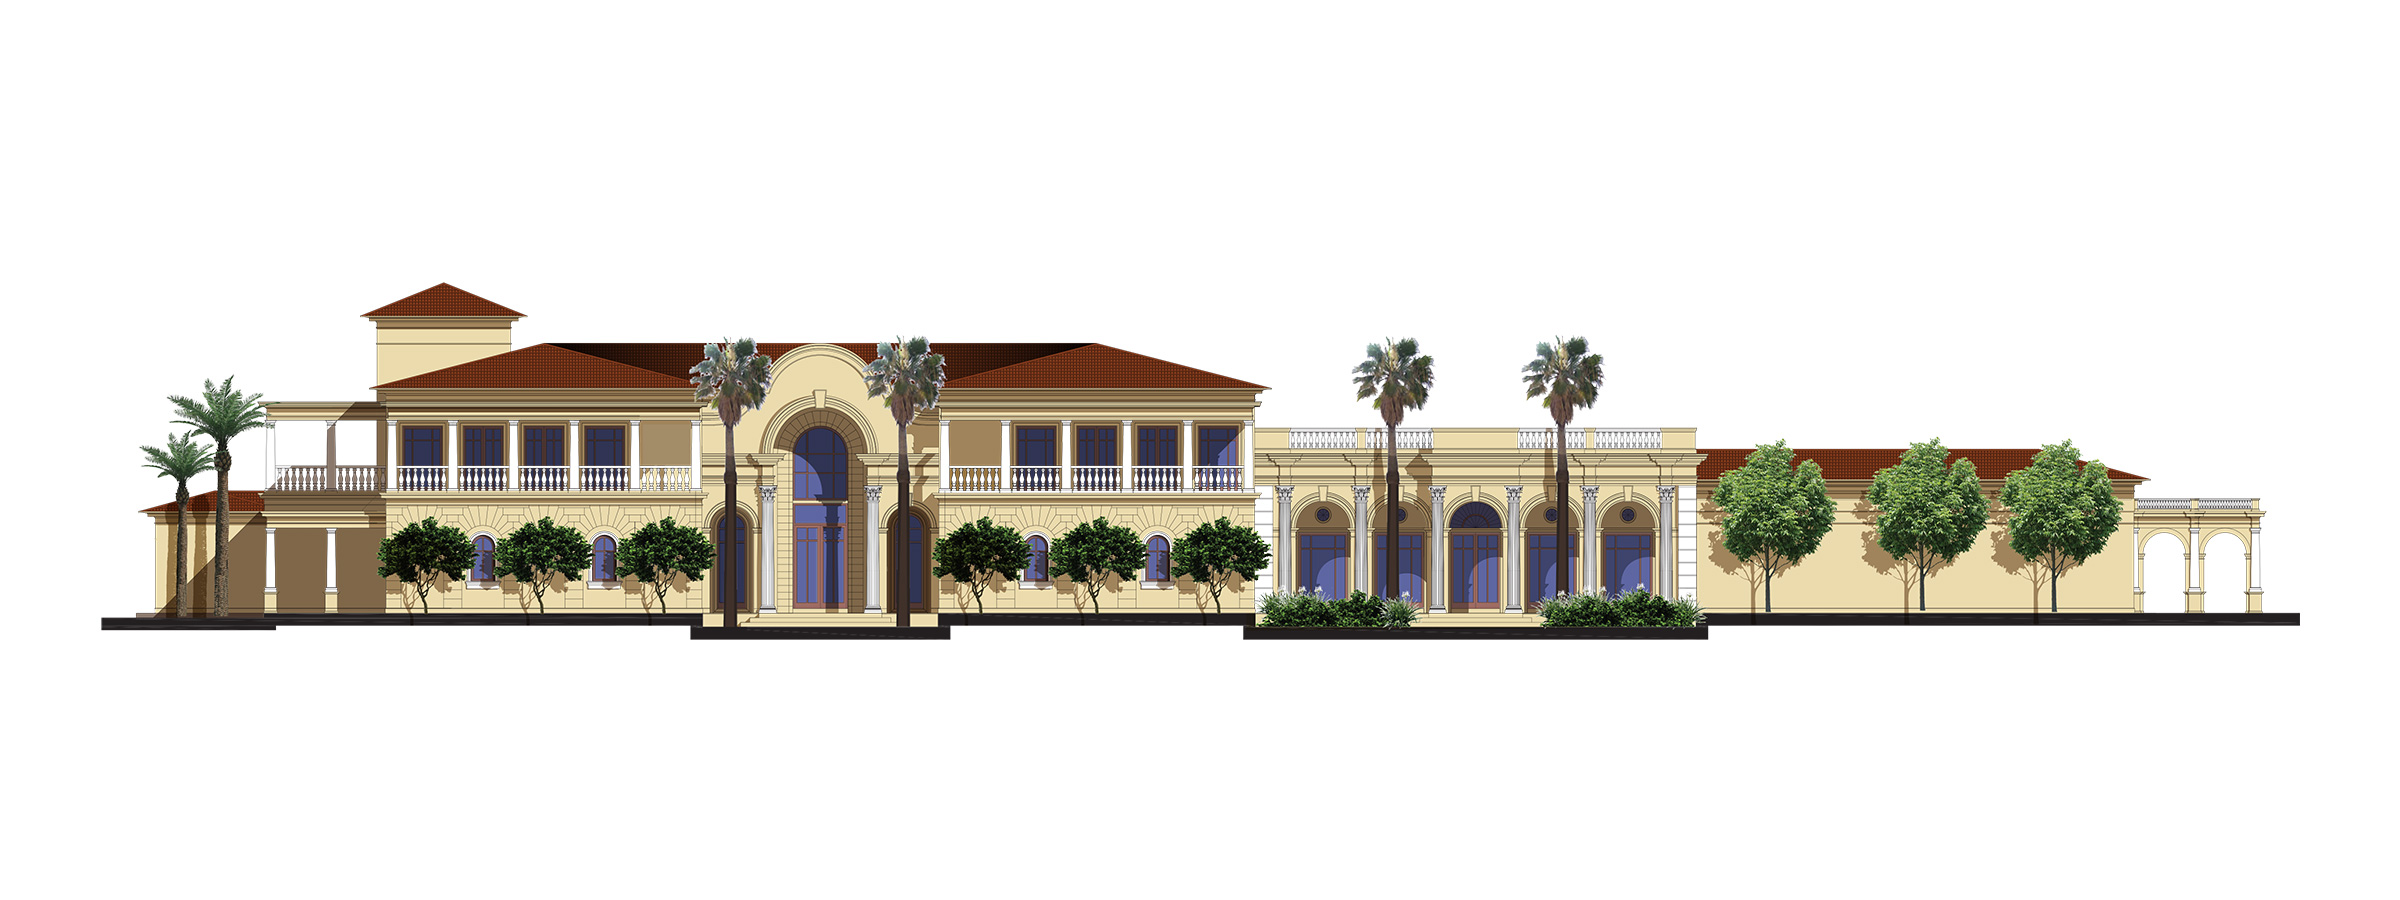 Front elevation of the Echbih Family Residence 2 designed by RTAE, Dubai